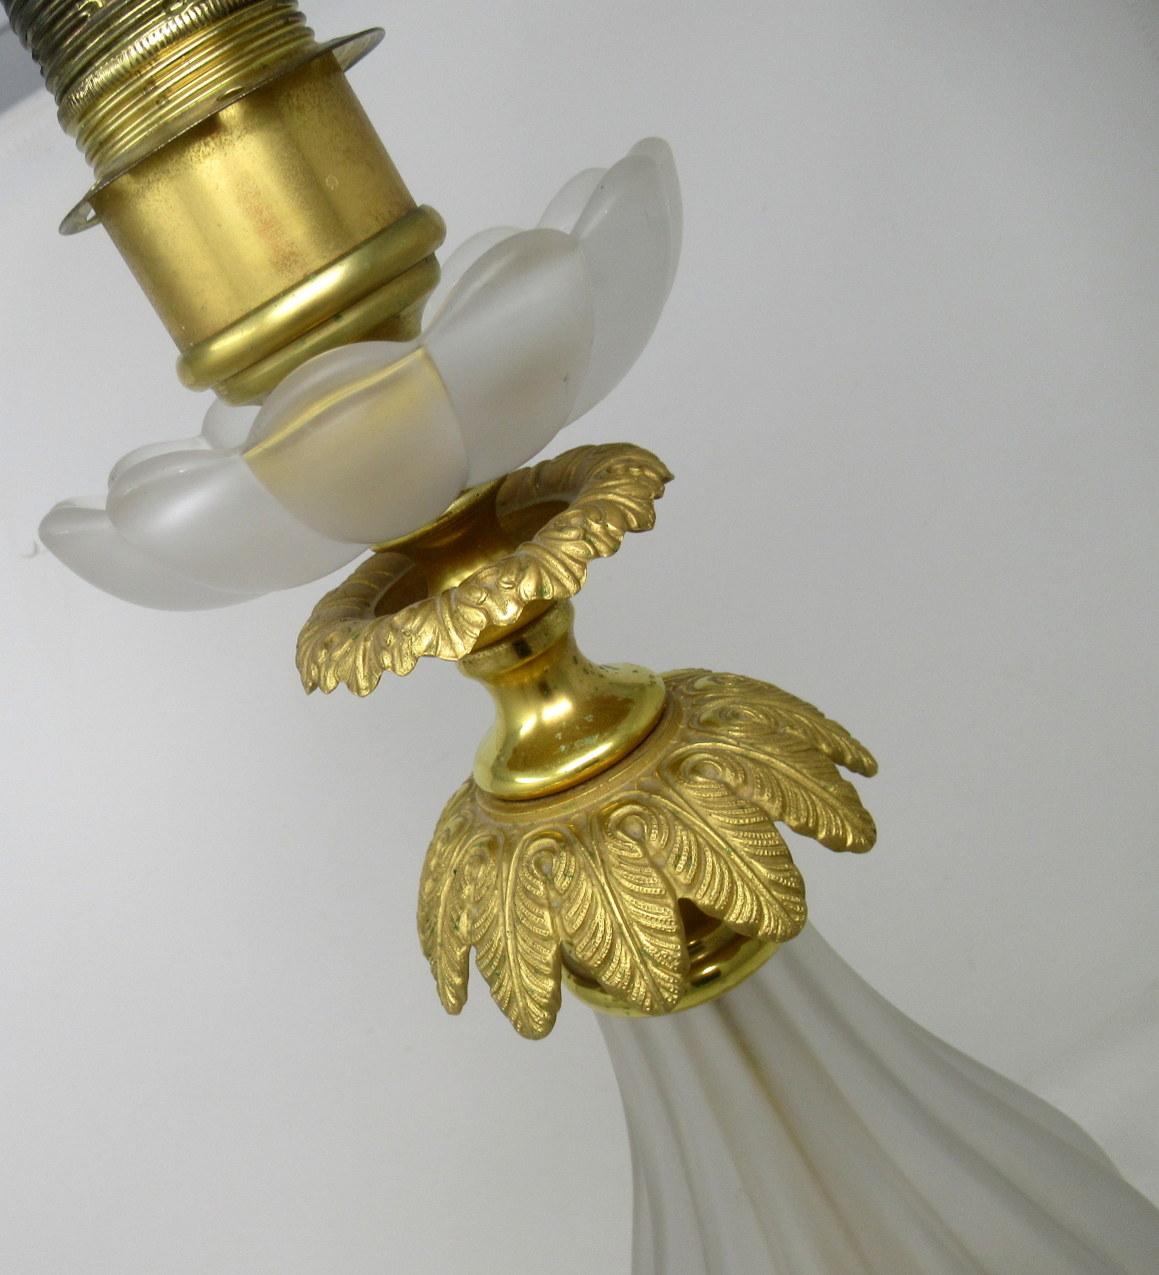 Set of Four Italian Murano Glass Table Lamps Mid-Century Modern Barovier Toso In Good Condition For Sale In Dublin, Ireland